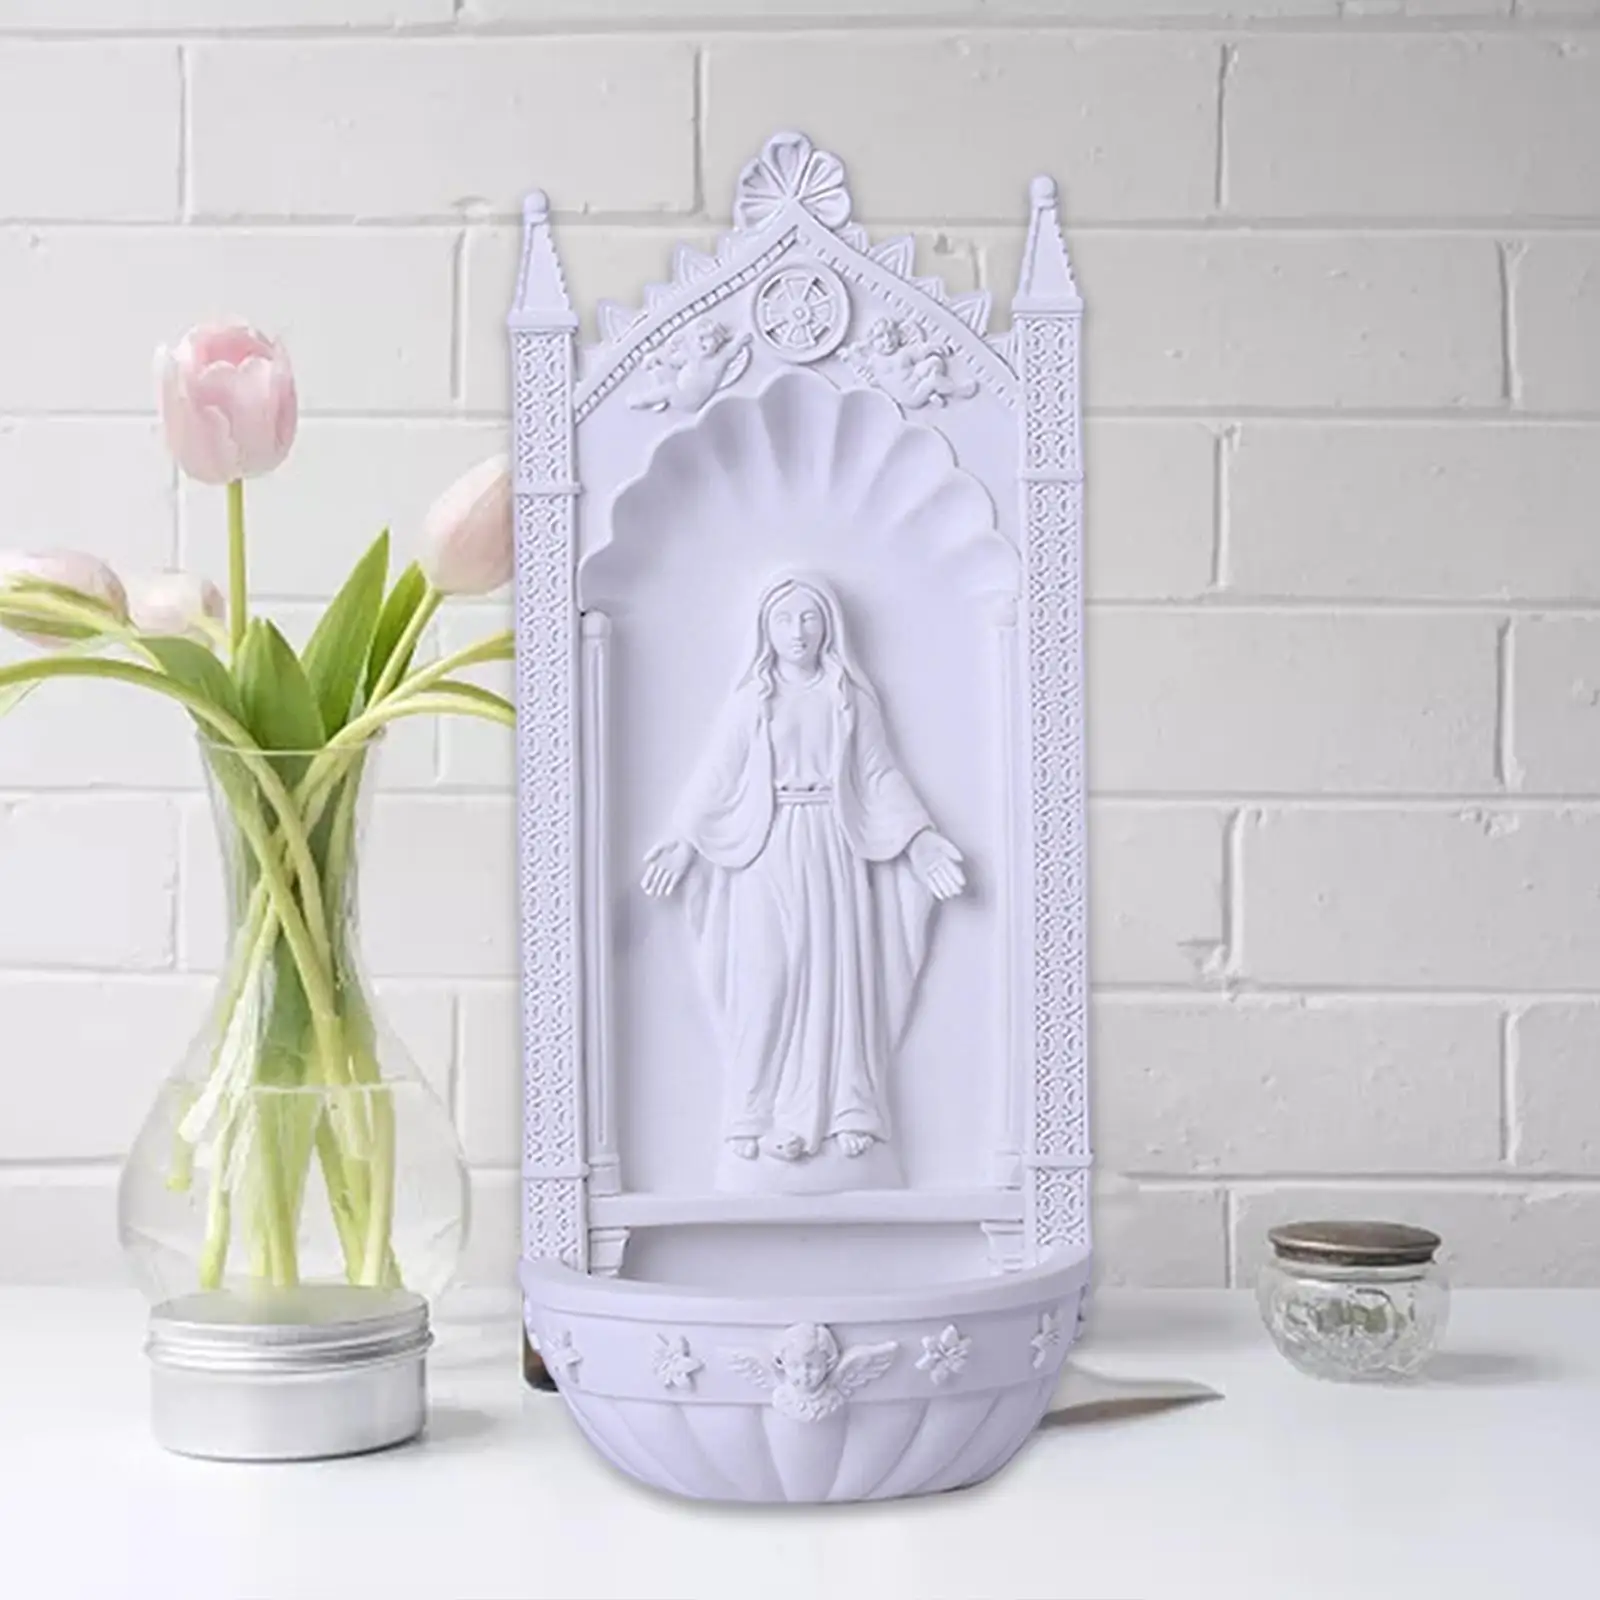 

Resin Jesus Statue Wall Hanging Desk Display Christian Blessed Virgin Mary Jesus Figurine Collection for Living Room Decoration